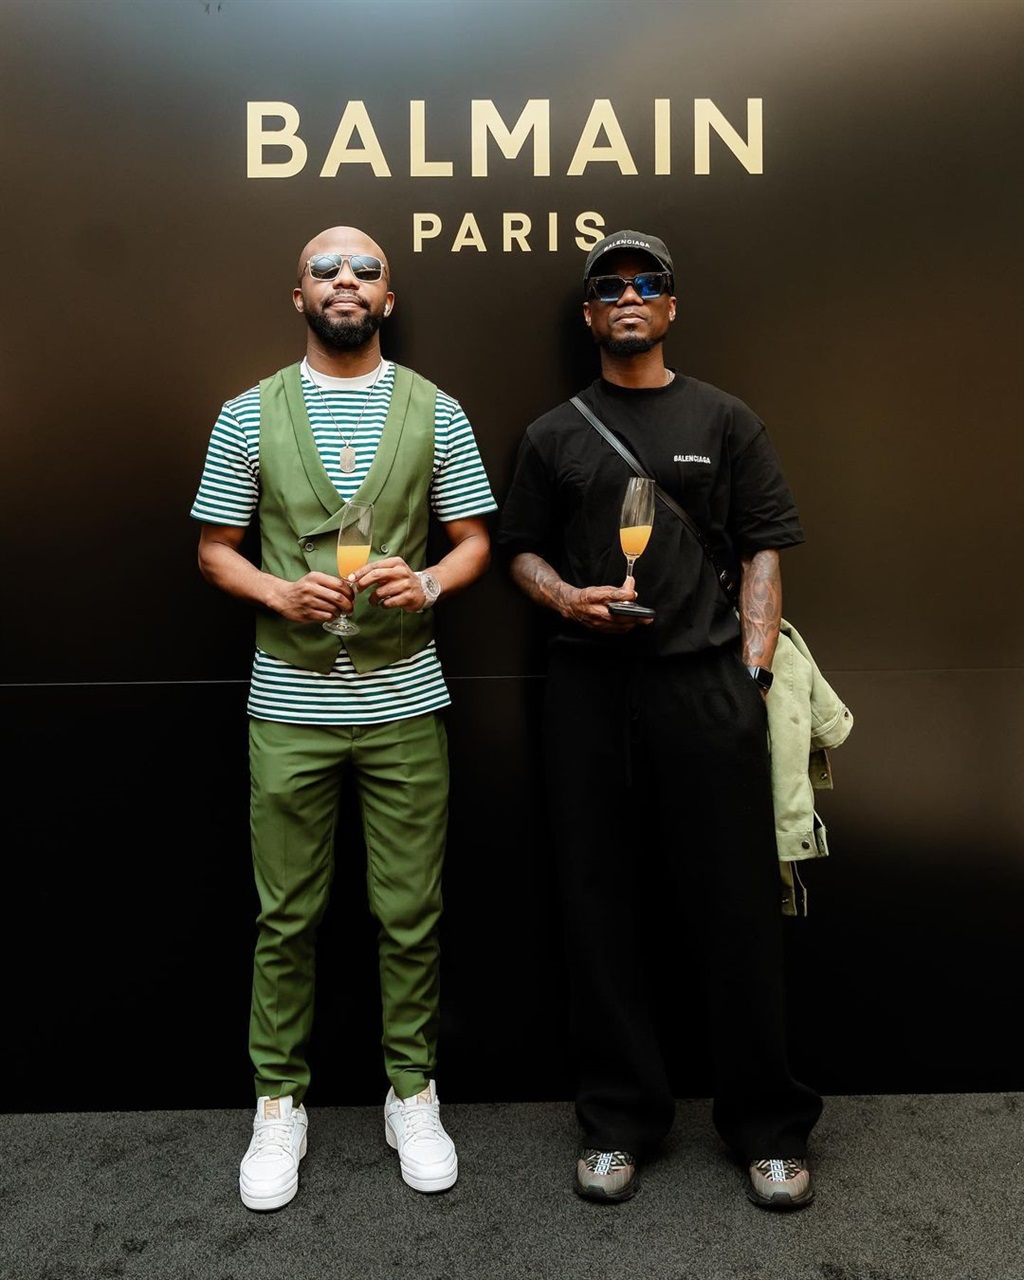 Teko Modise with a friend at the Balmain store ope